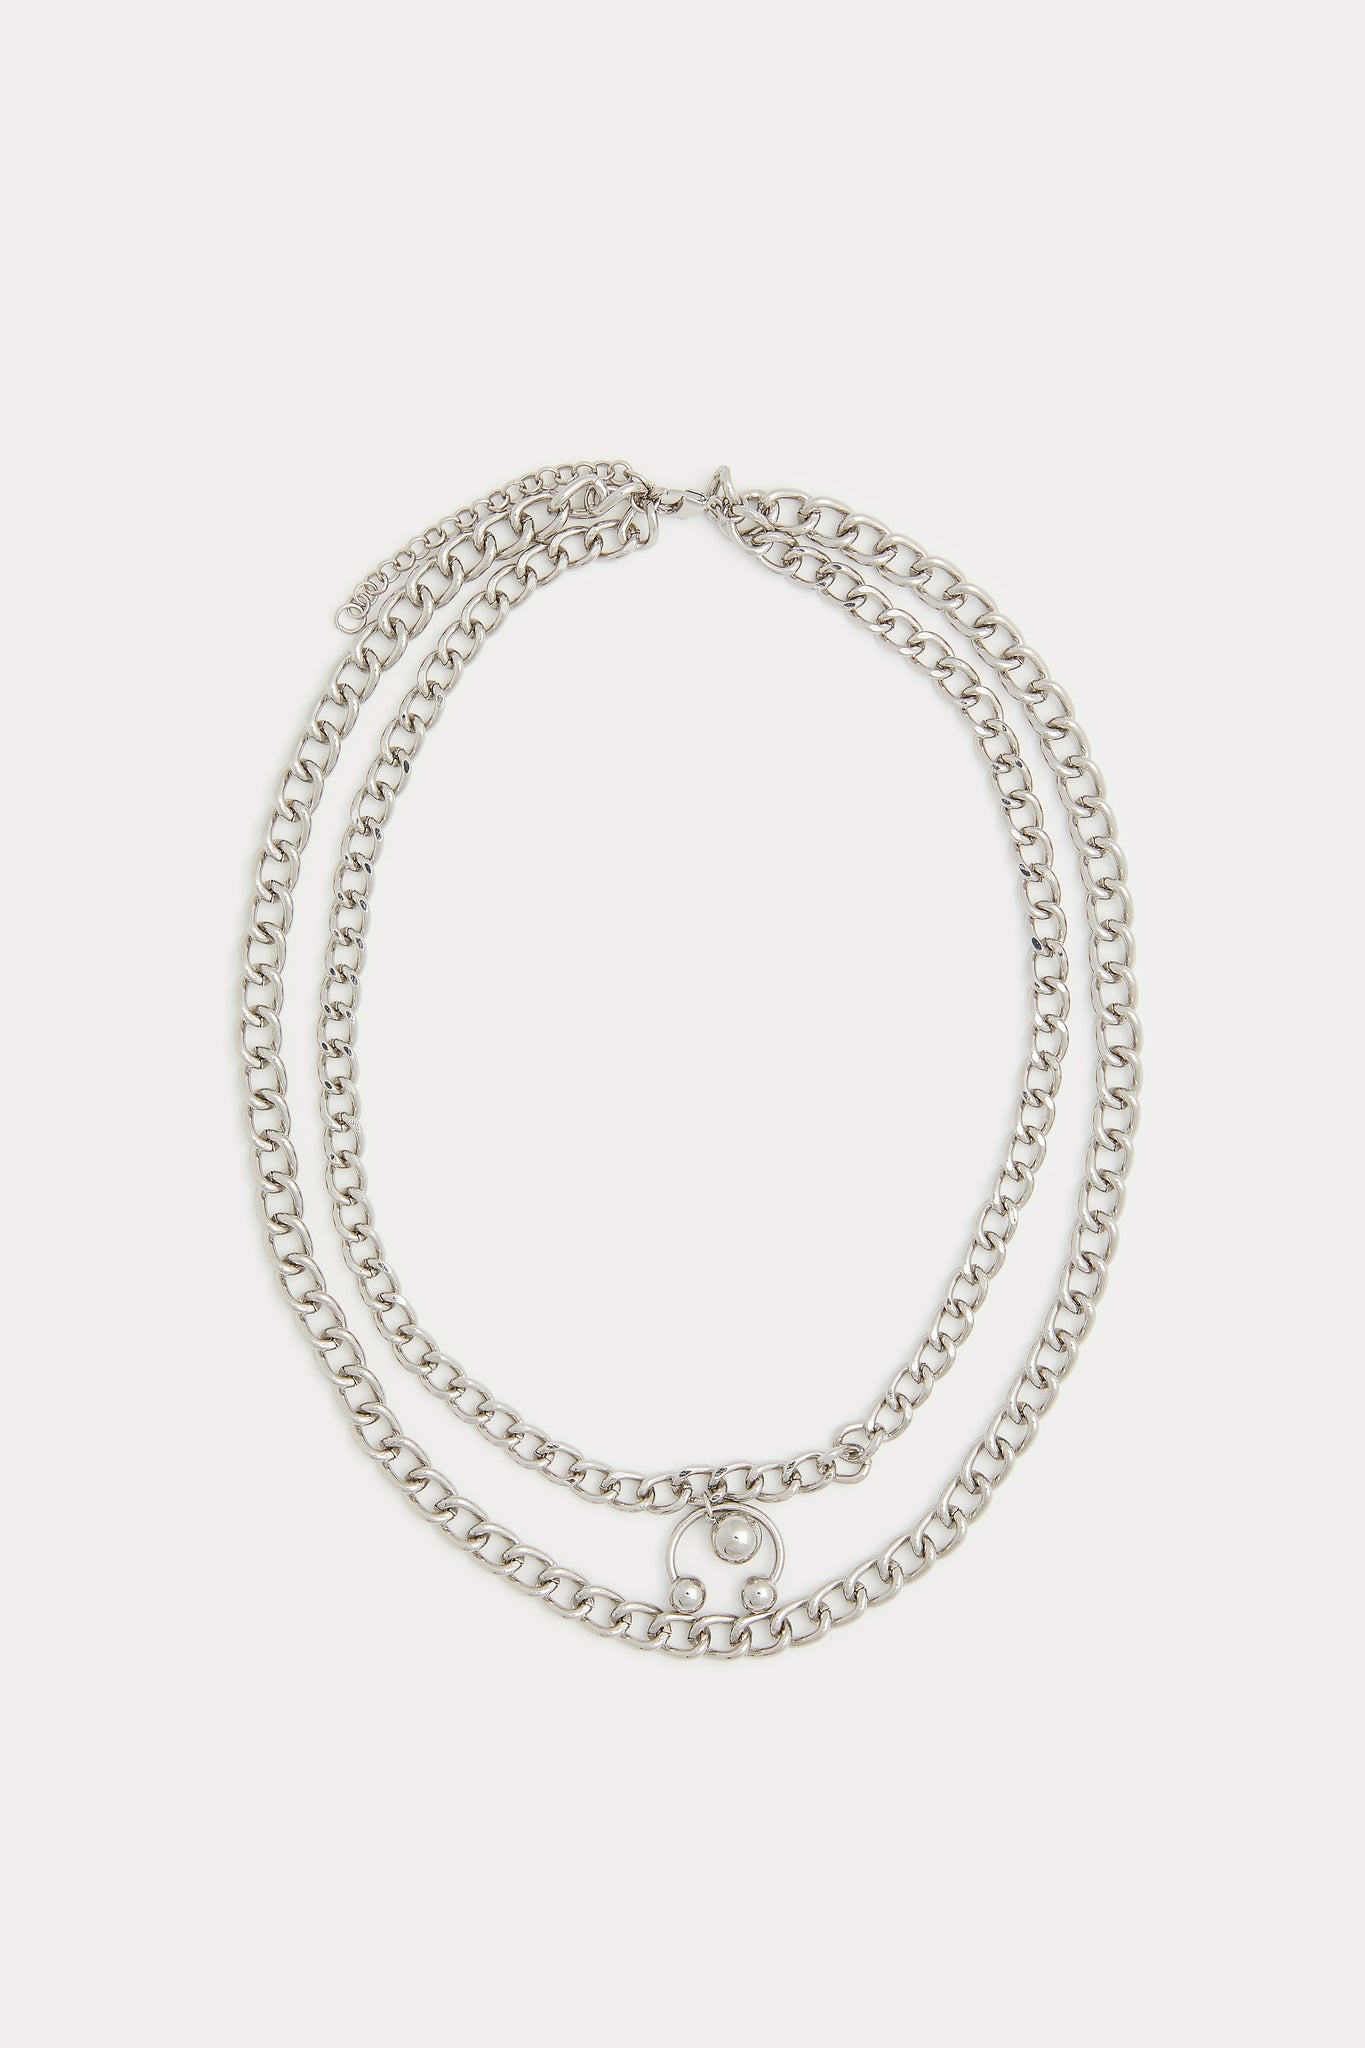 IMMANUEL NECKLACE - SILVER